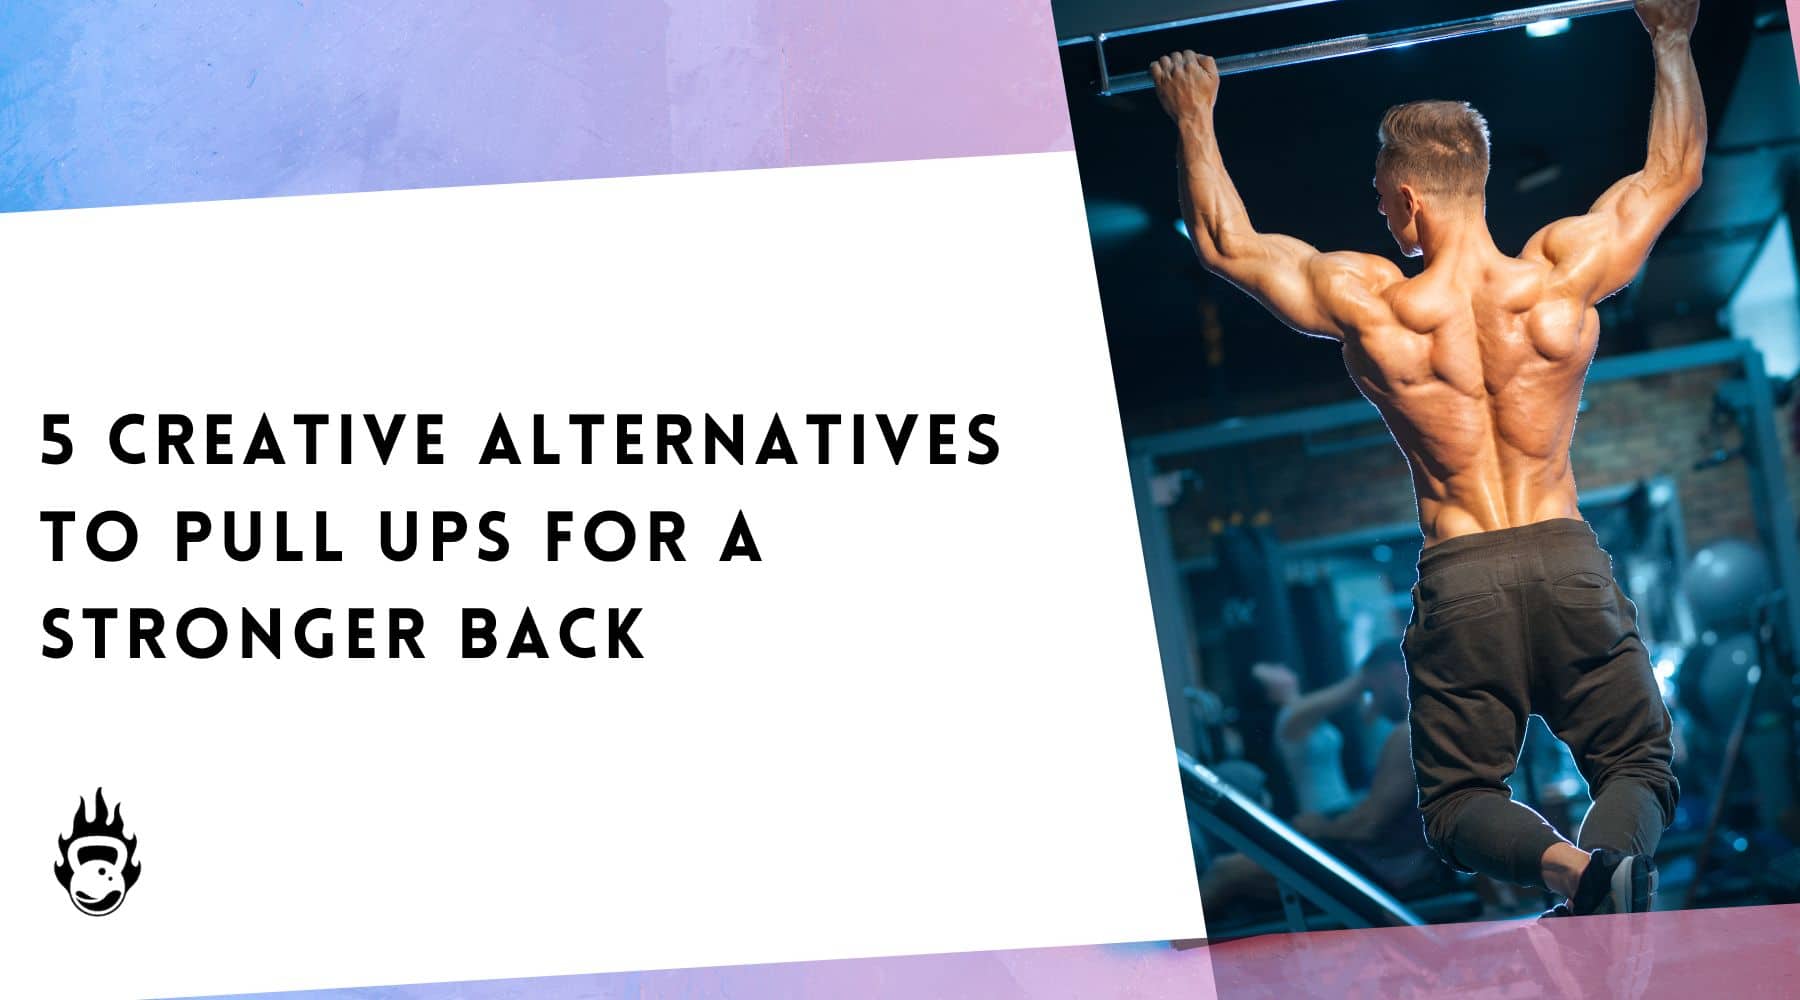 5 Creative Alternatives to Pull Ups for a Stronger Back